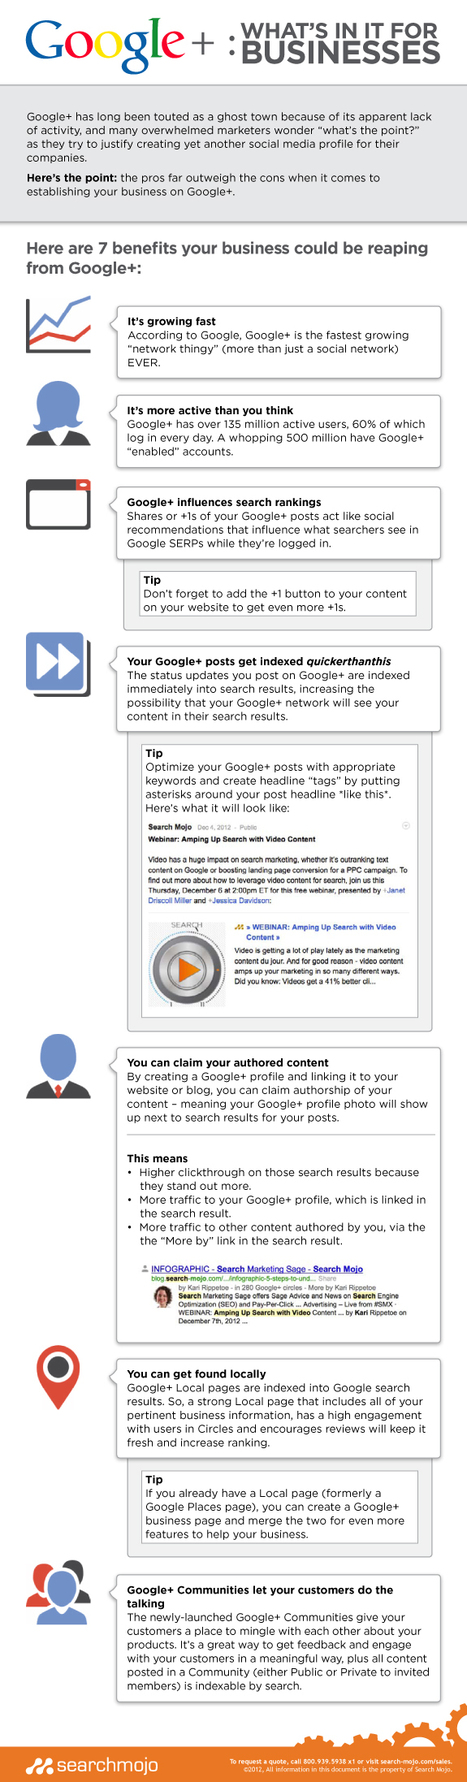 Benefits of Google+ for Business Infographic | Search Mojo | The MarTech Digest | Scoop.it